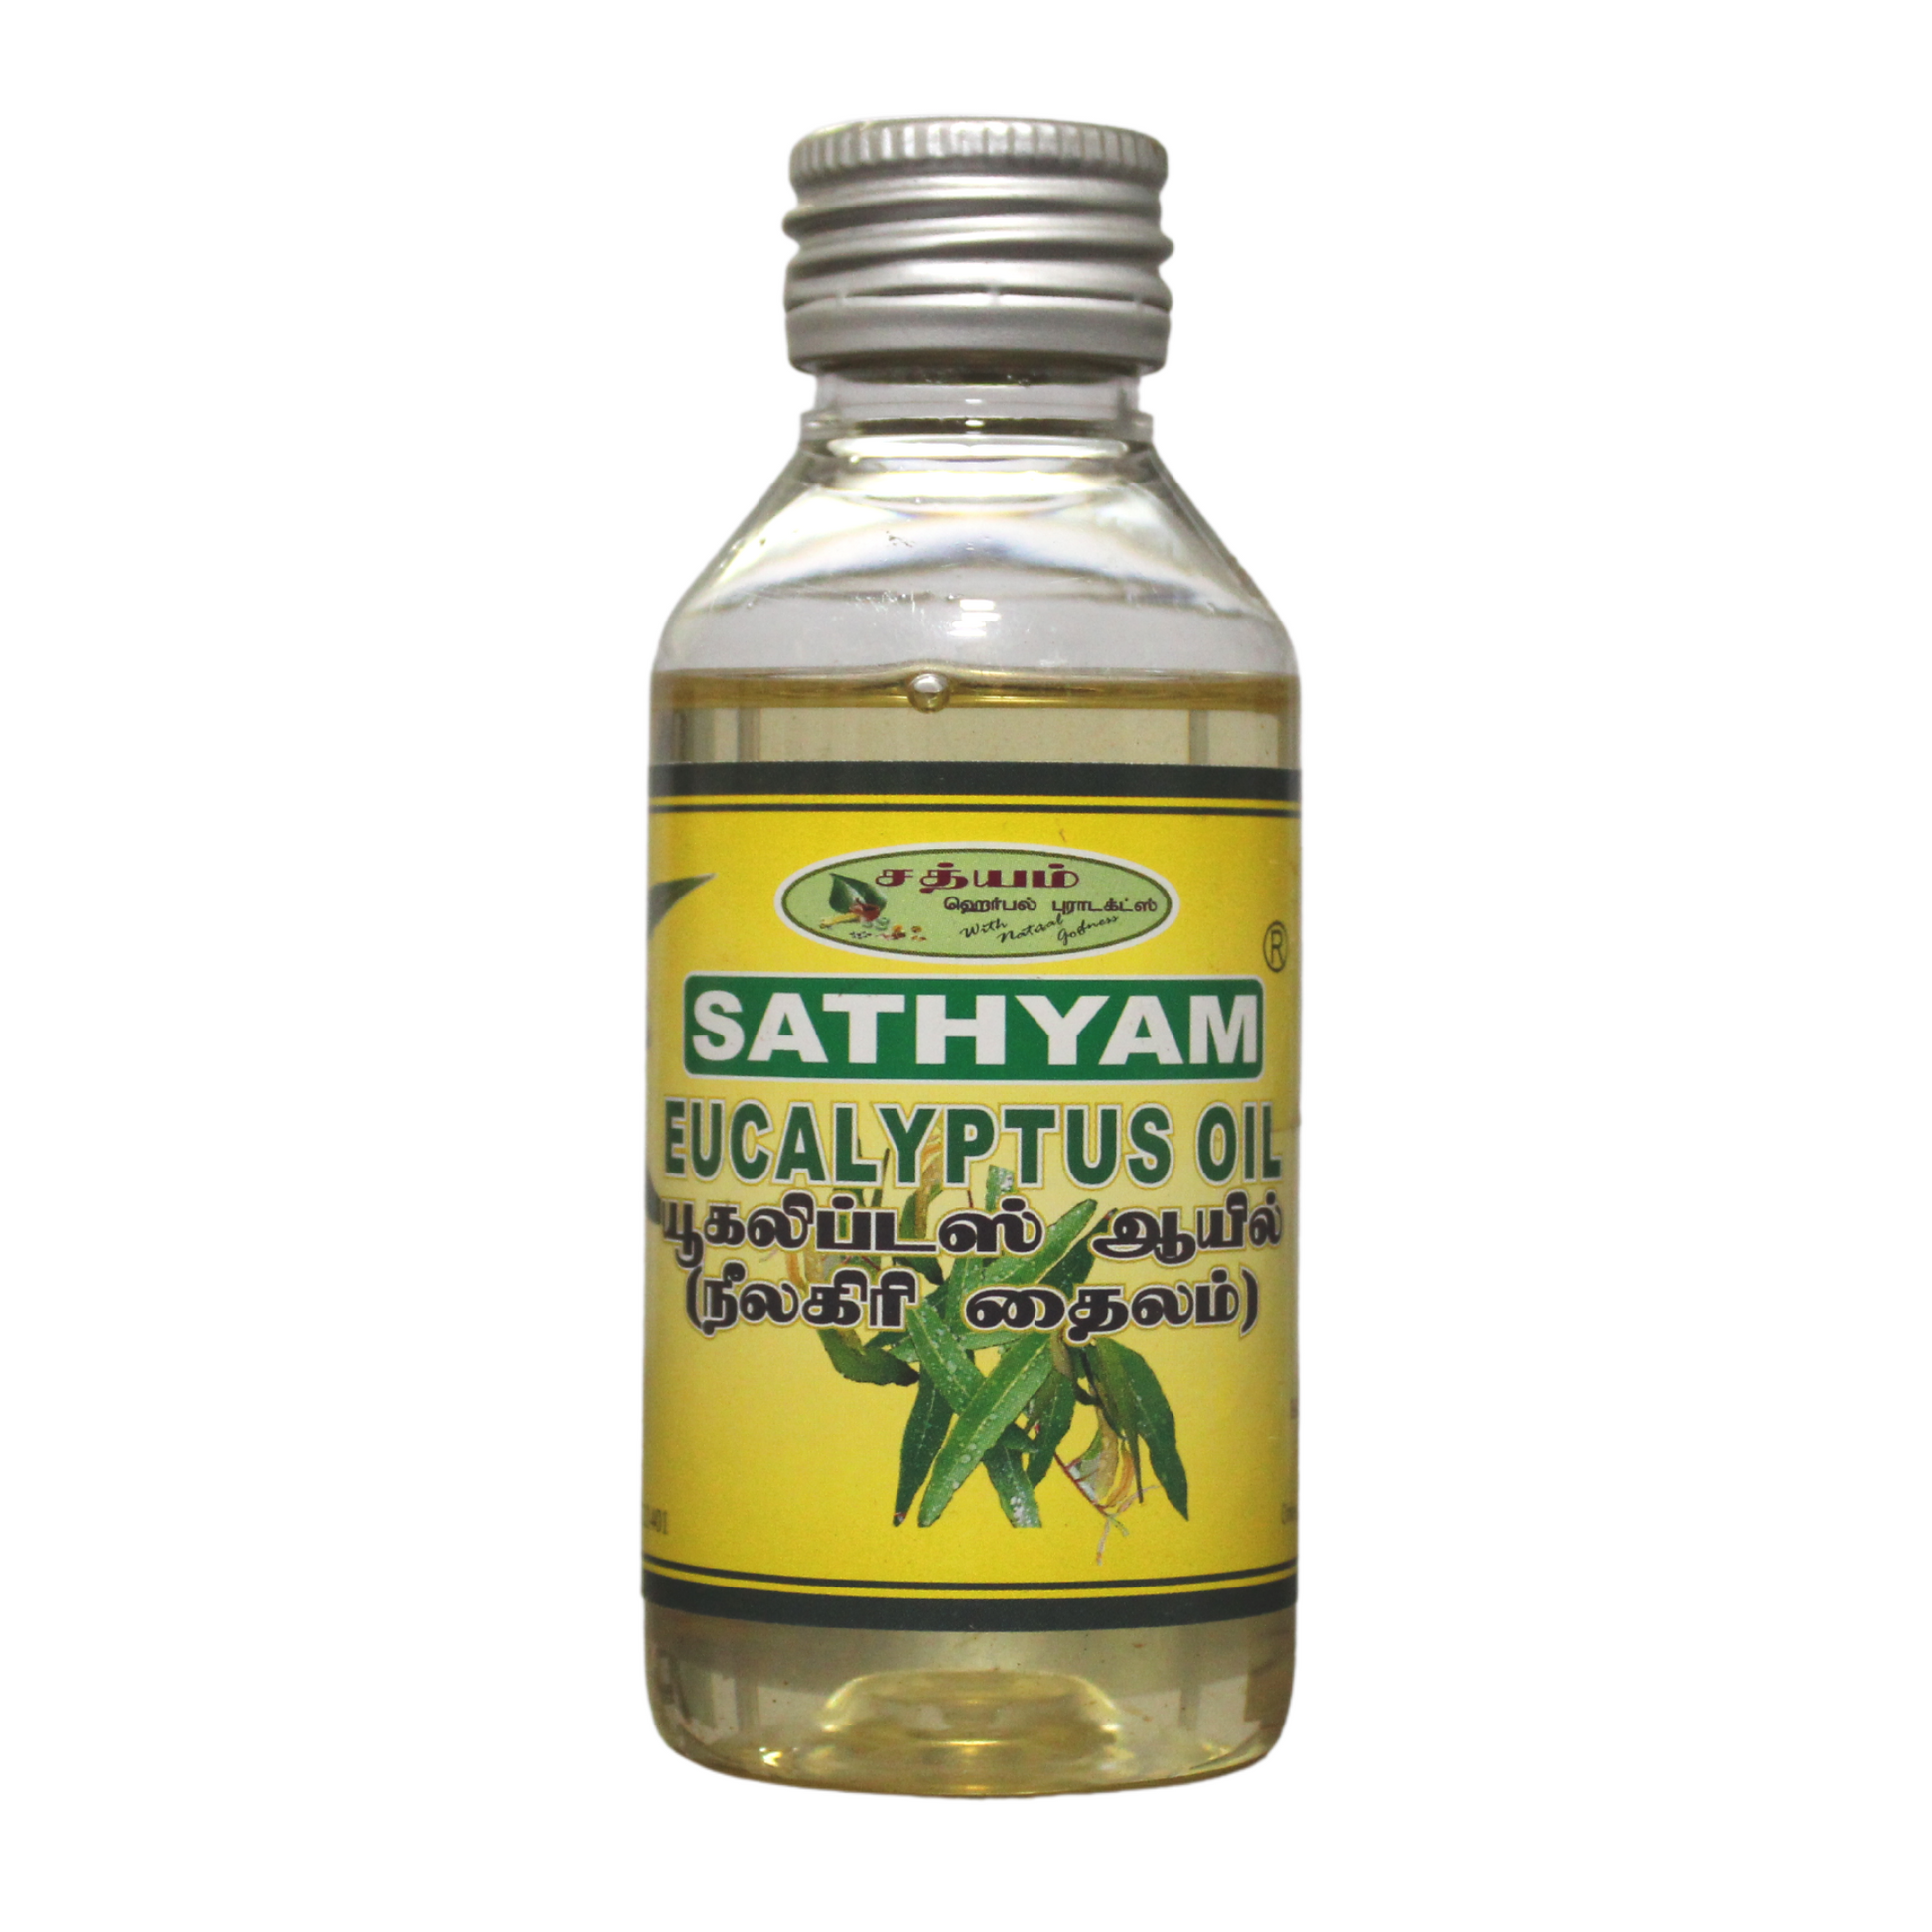 Shop Eucalyptus Oil 60ml at price 155.00 from Sathyam Herbals Online - Ayush Care